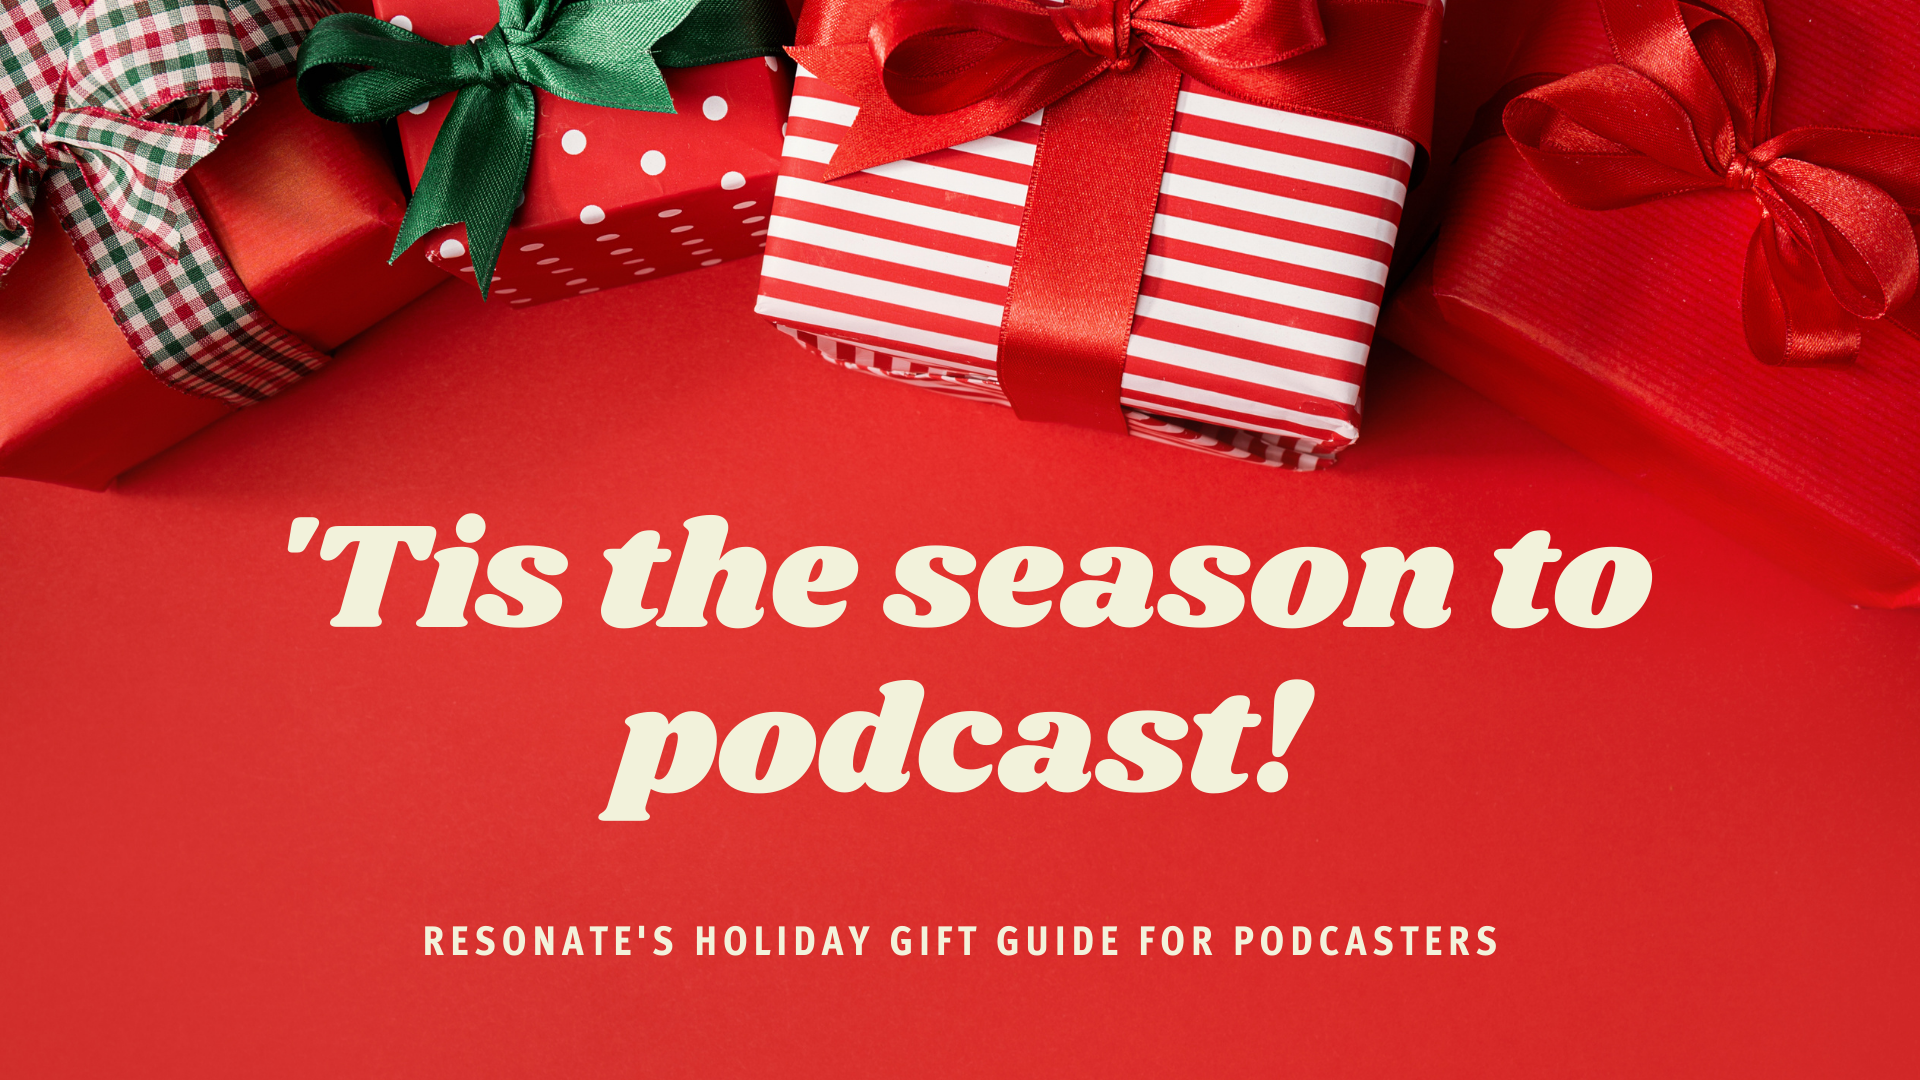 Our curated list of must-have items for podcasters